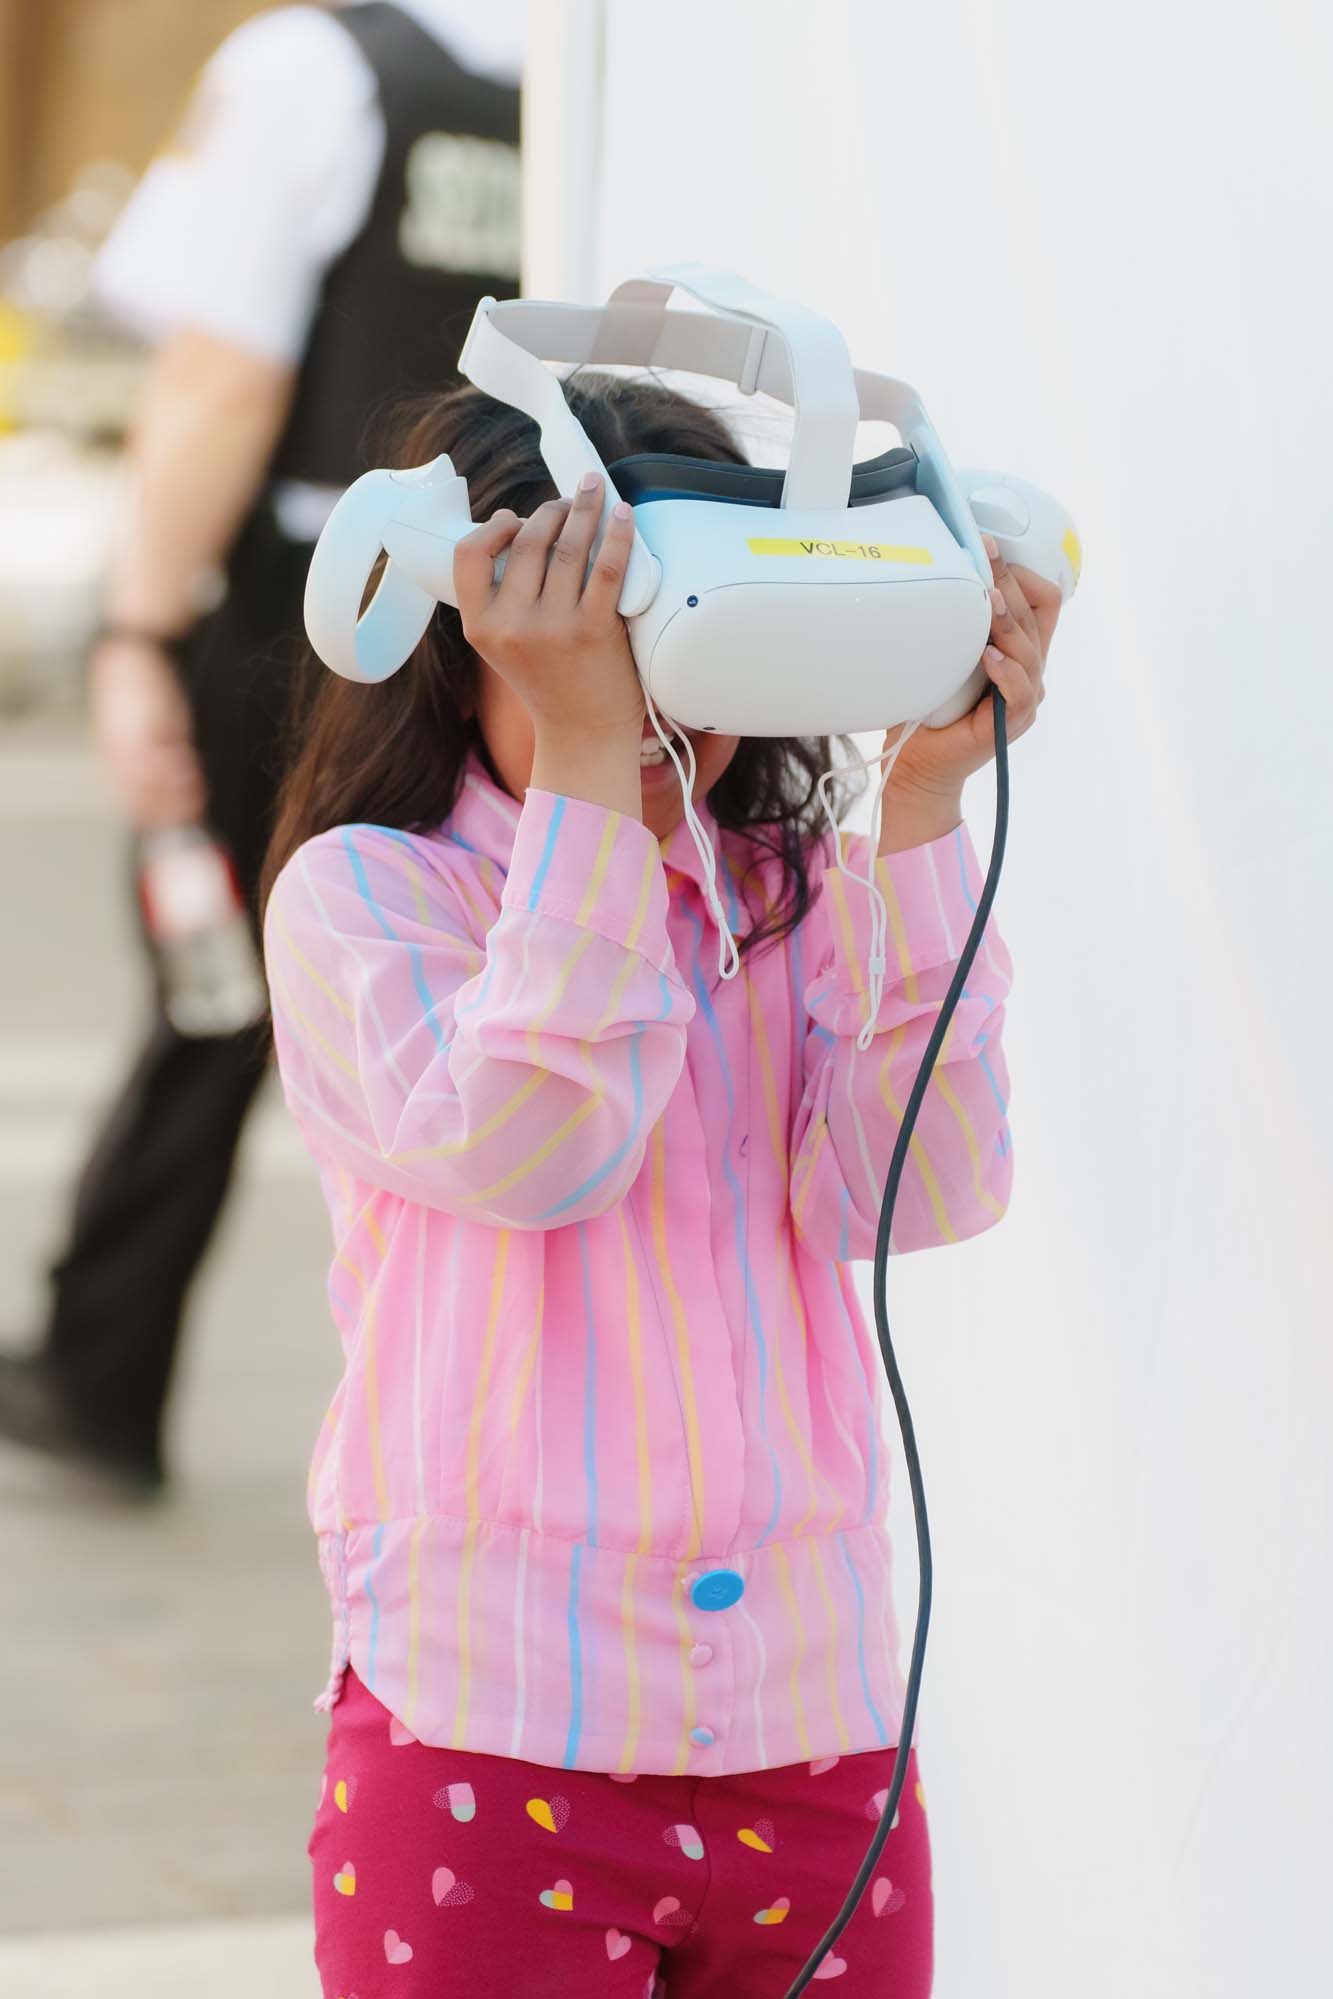 A child excitedly putting on a virtual reality headset.